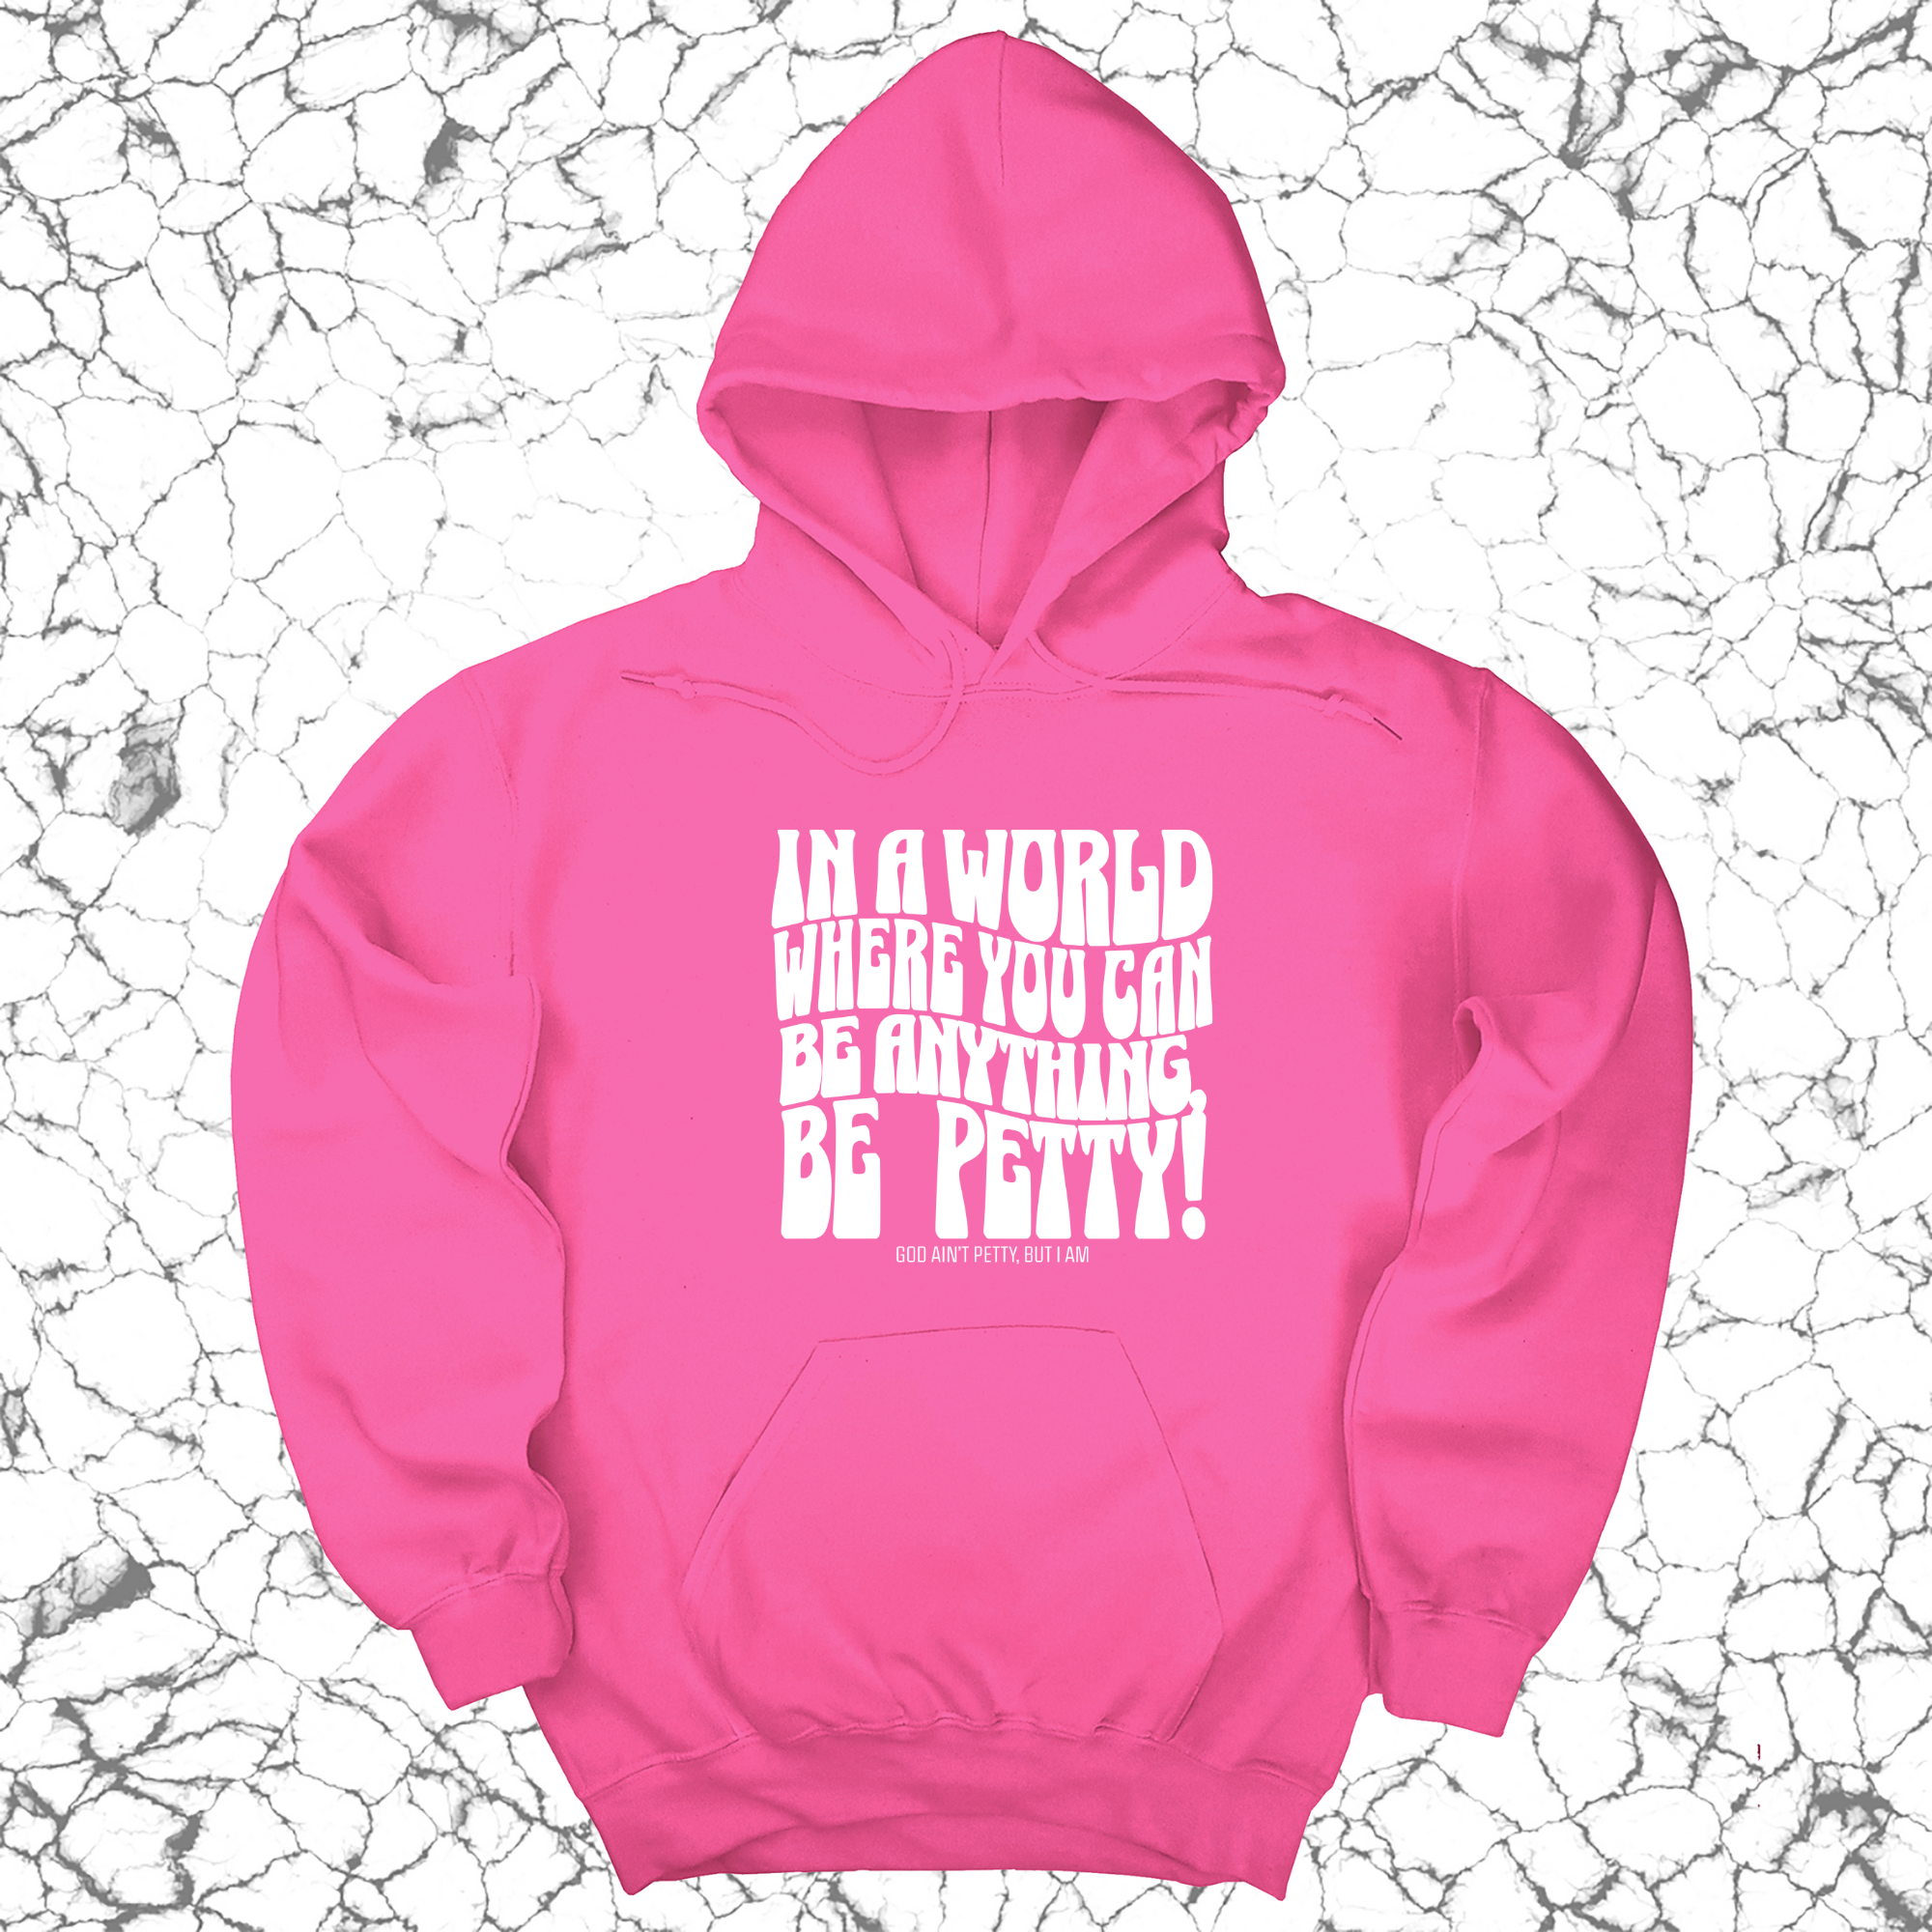 In a world where you can be anything, BE PETTY Unisex Hoodie-Hoodie-The Original God Ain't Petty But I Am